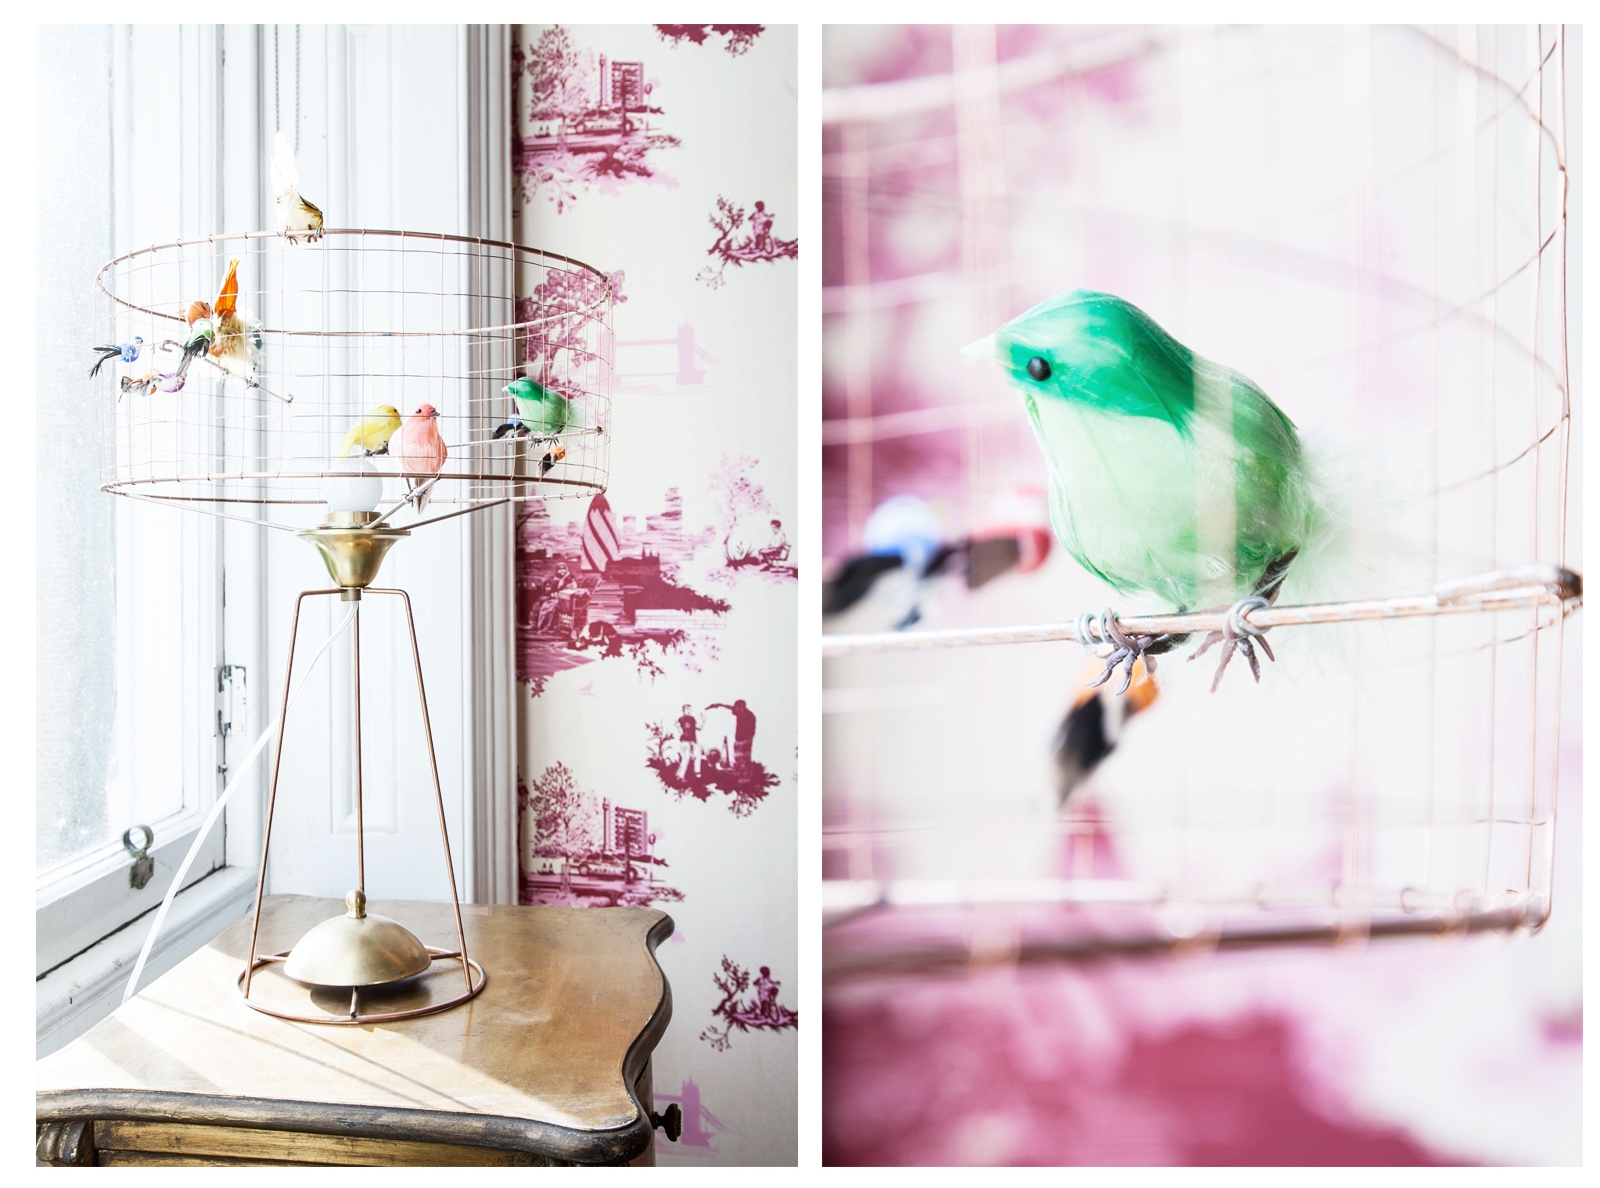 Volieres birdcage lamp as seen in The Pink House Edinburgh/Photo: Susie Lowe